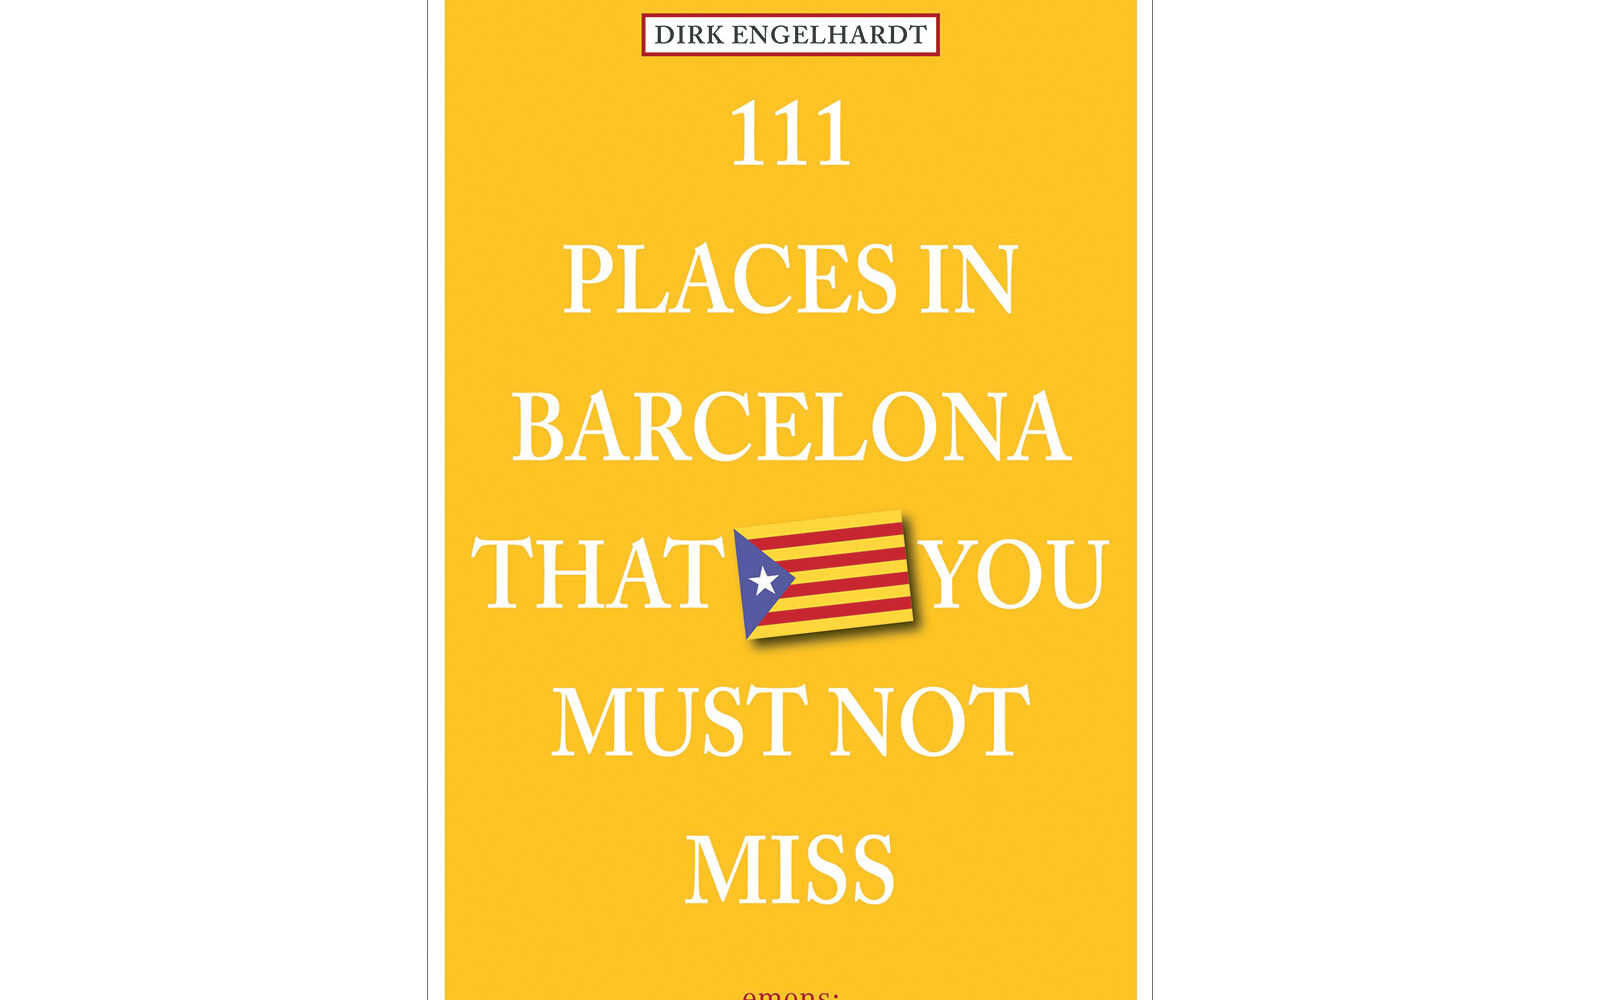 111 places in Barcelona that you must not miss